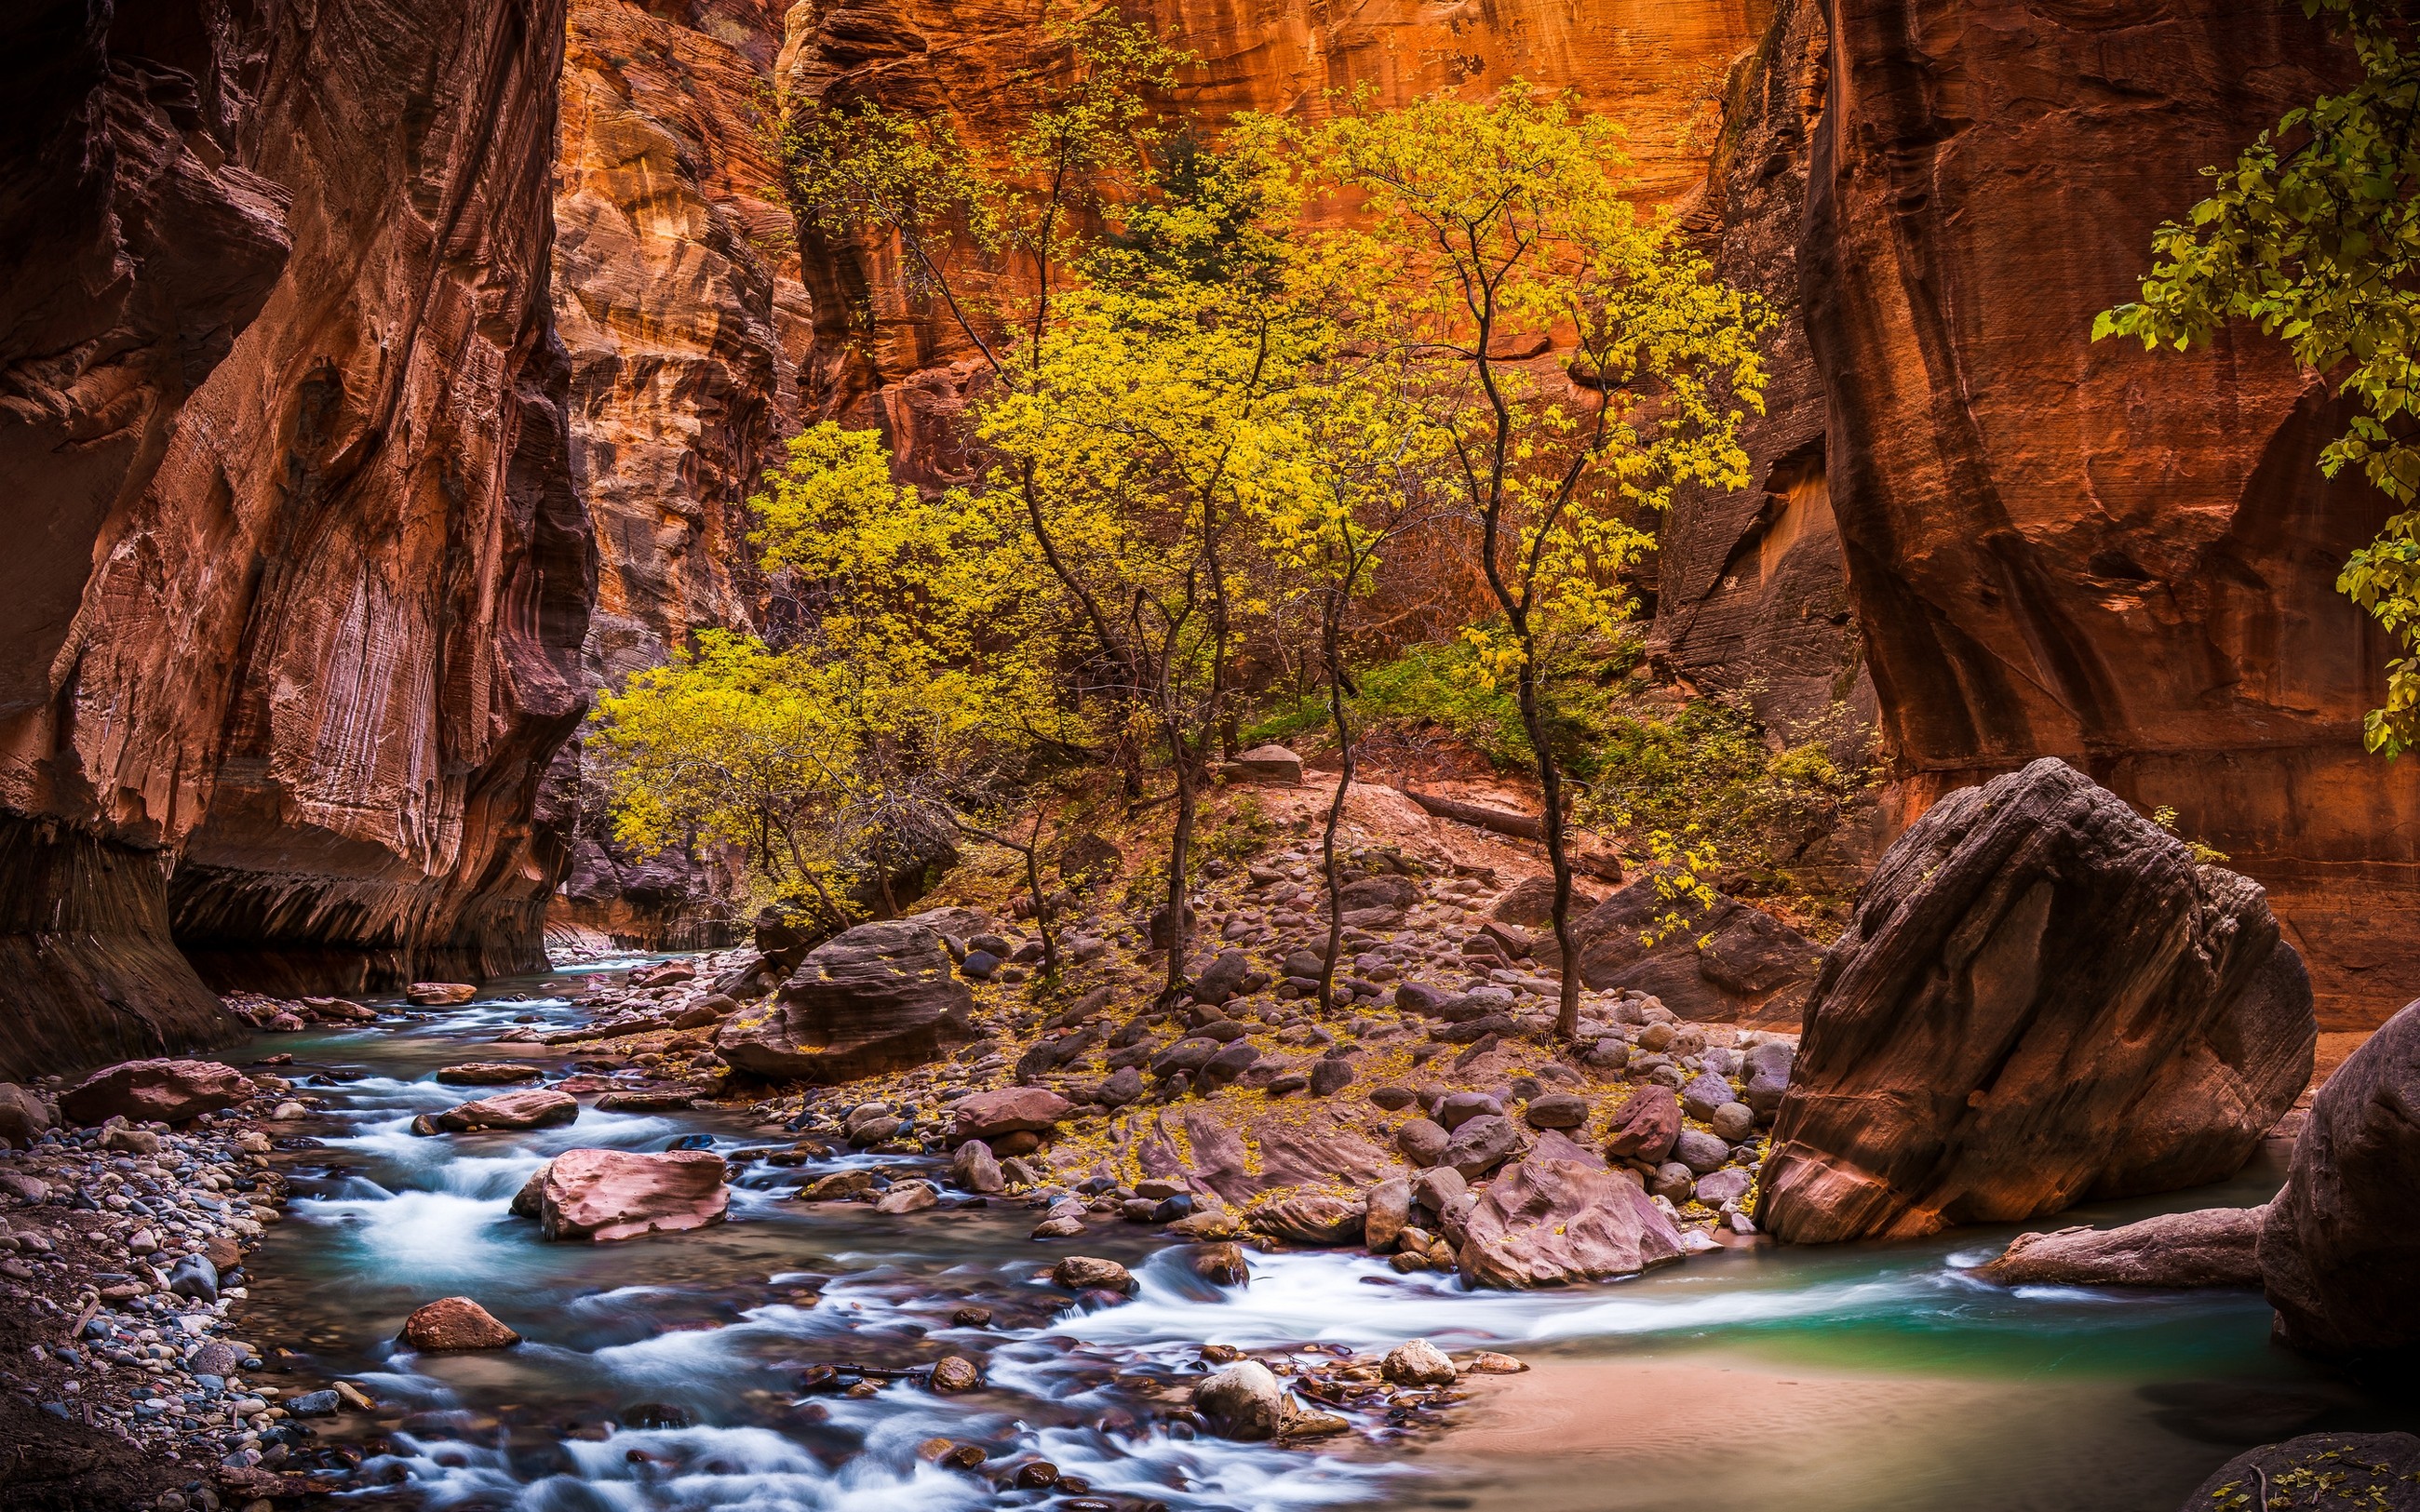 General 2600x1625 landscape nature Zion National Park river canyon Utah trees erosion red USA national park stones pebbles valley HDR stream rocks